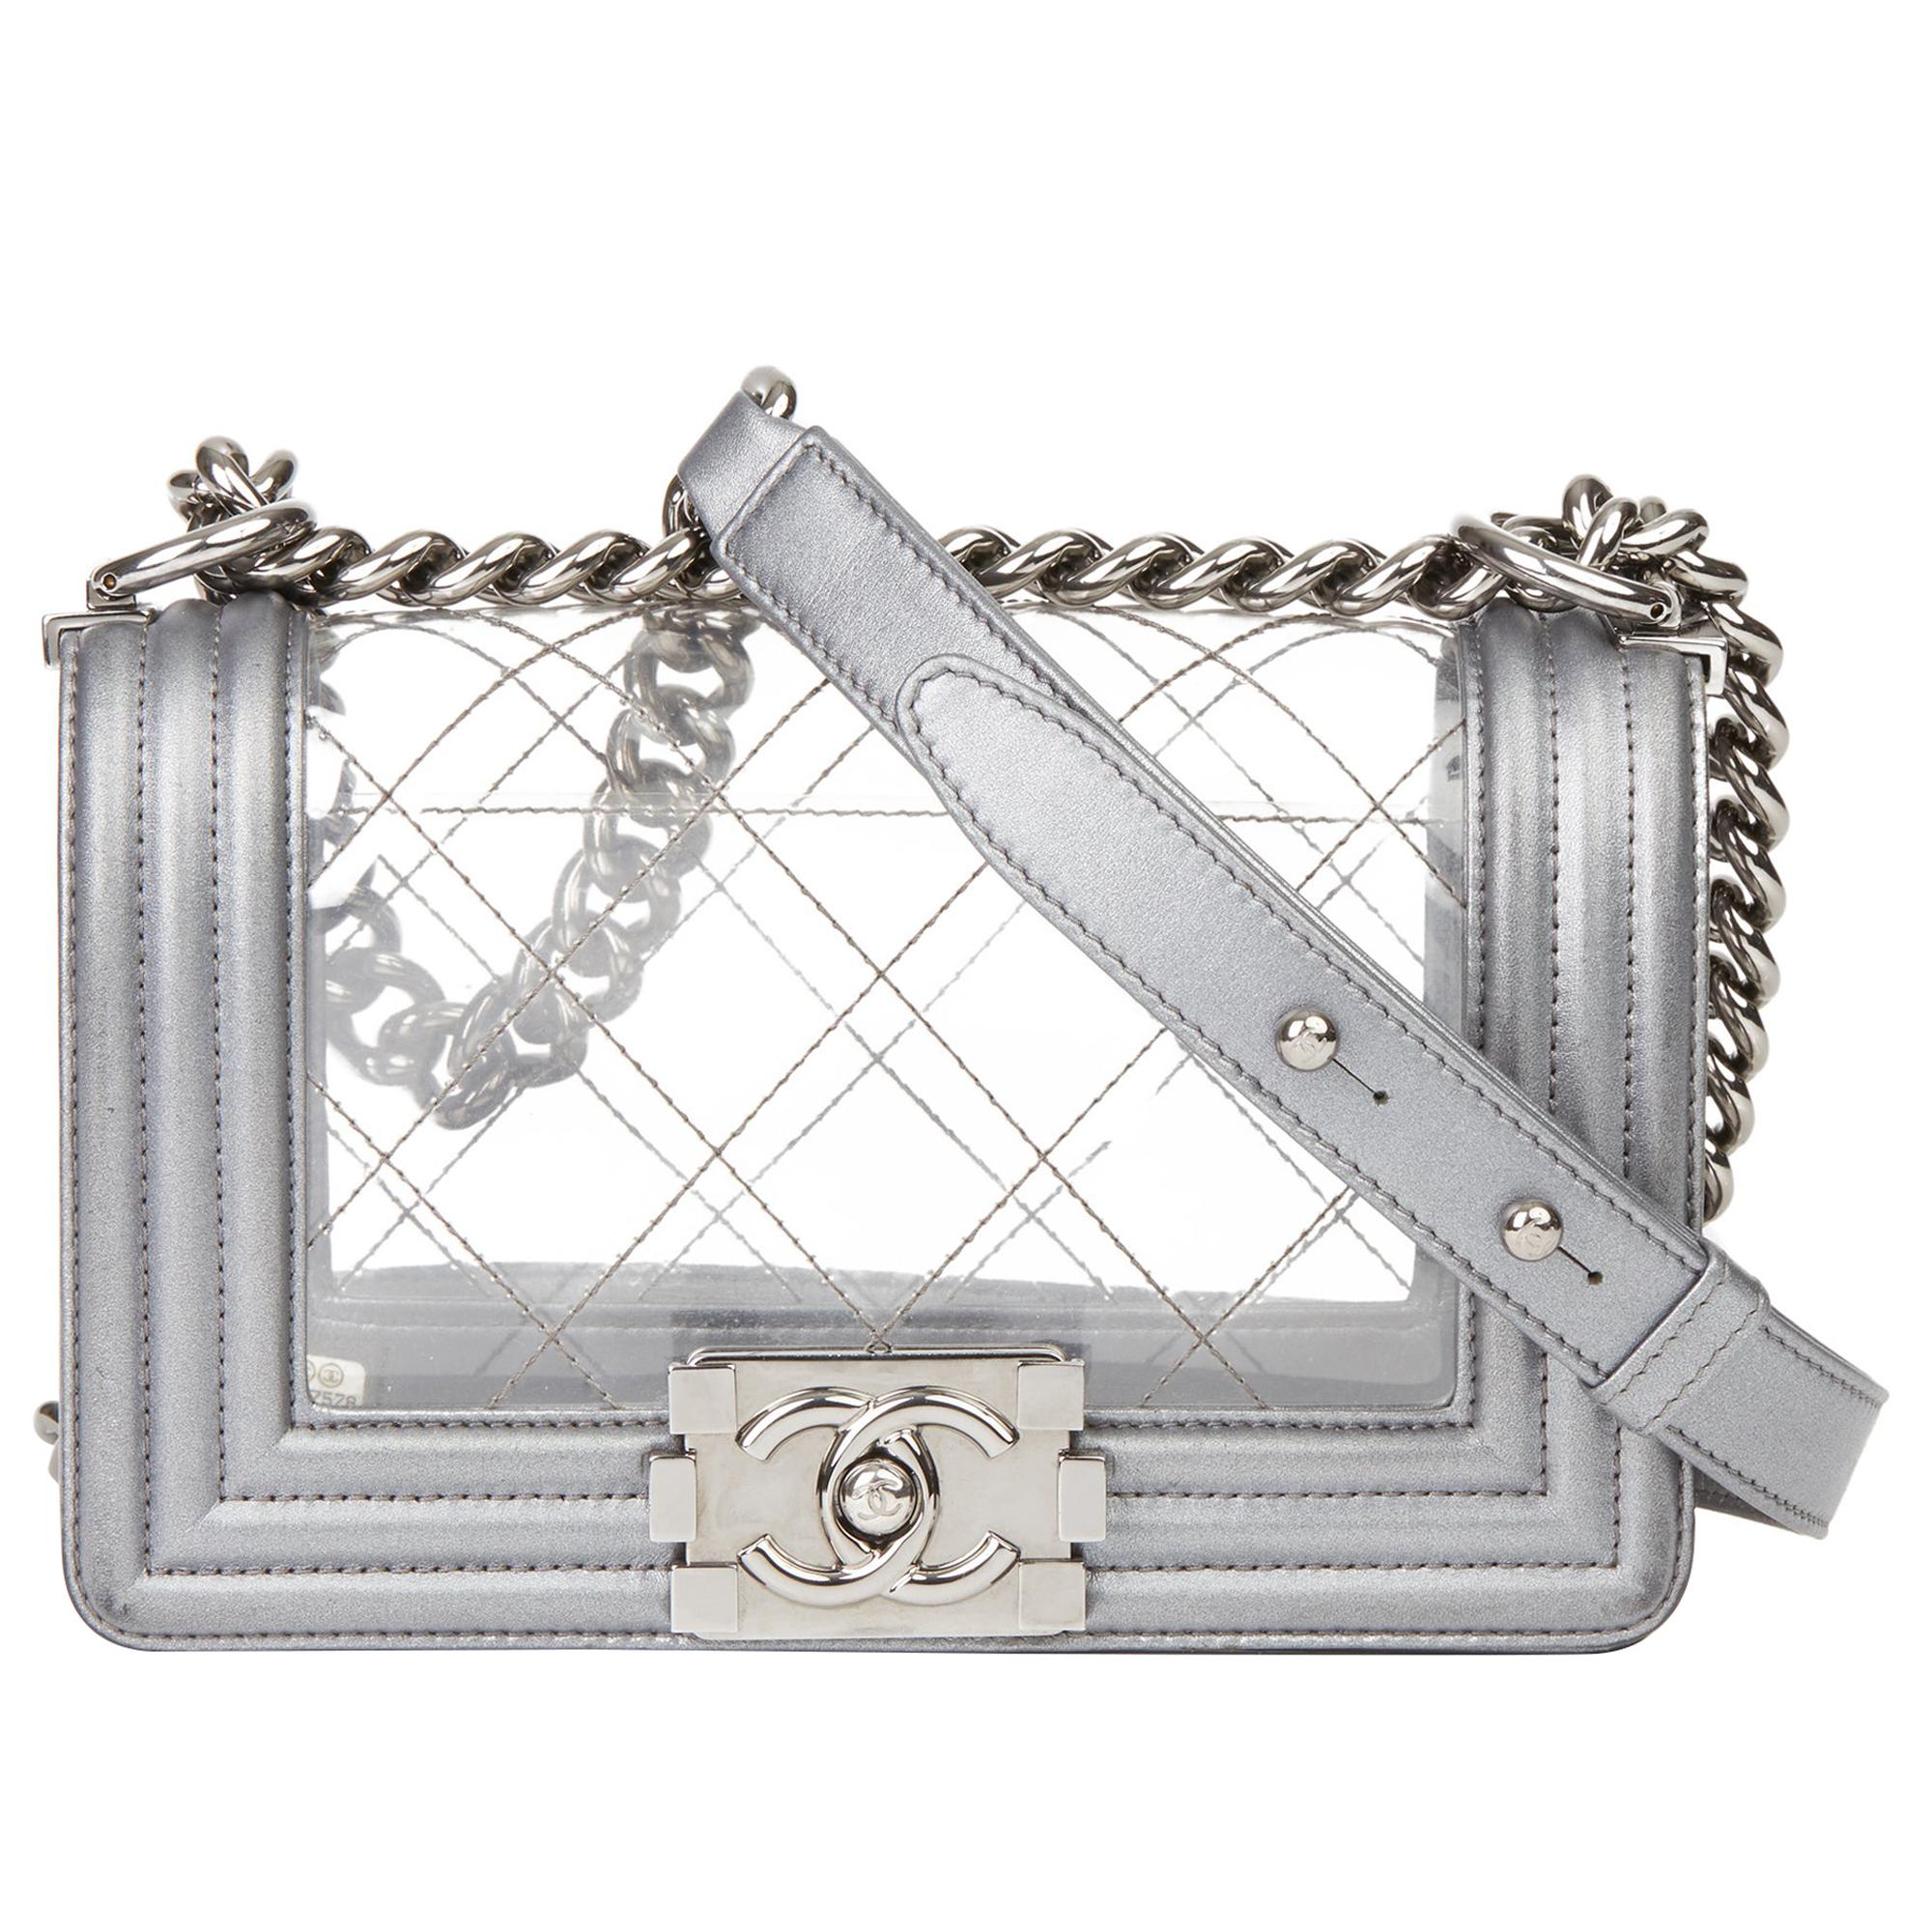 2014 Chanel Silver Metallic Leather & Transparent PVC Naked Small  Le Boy